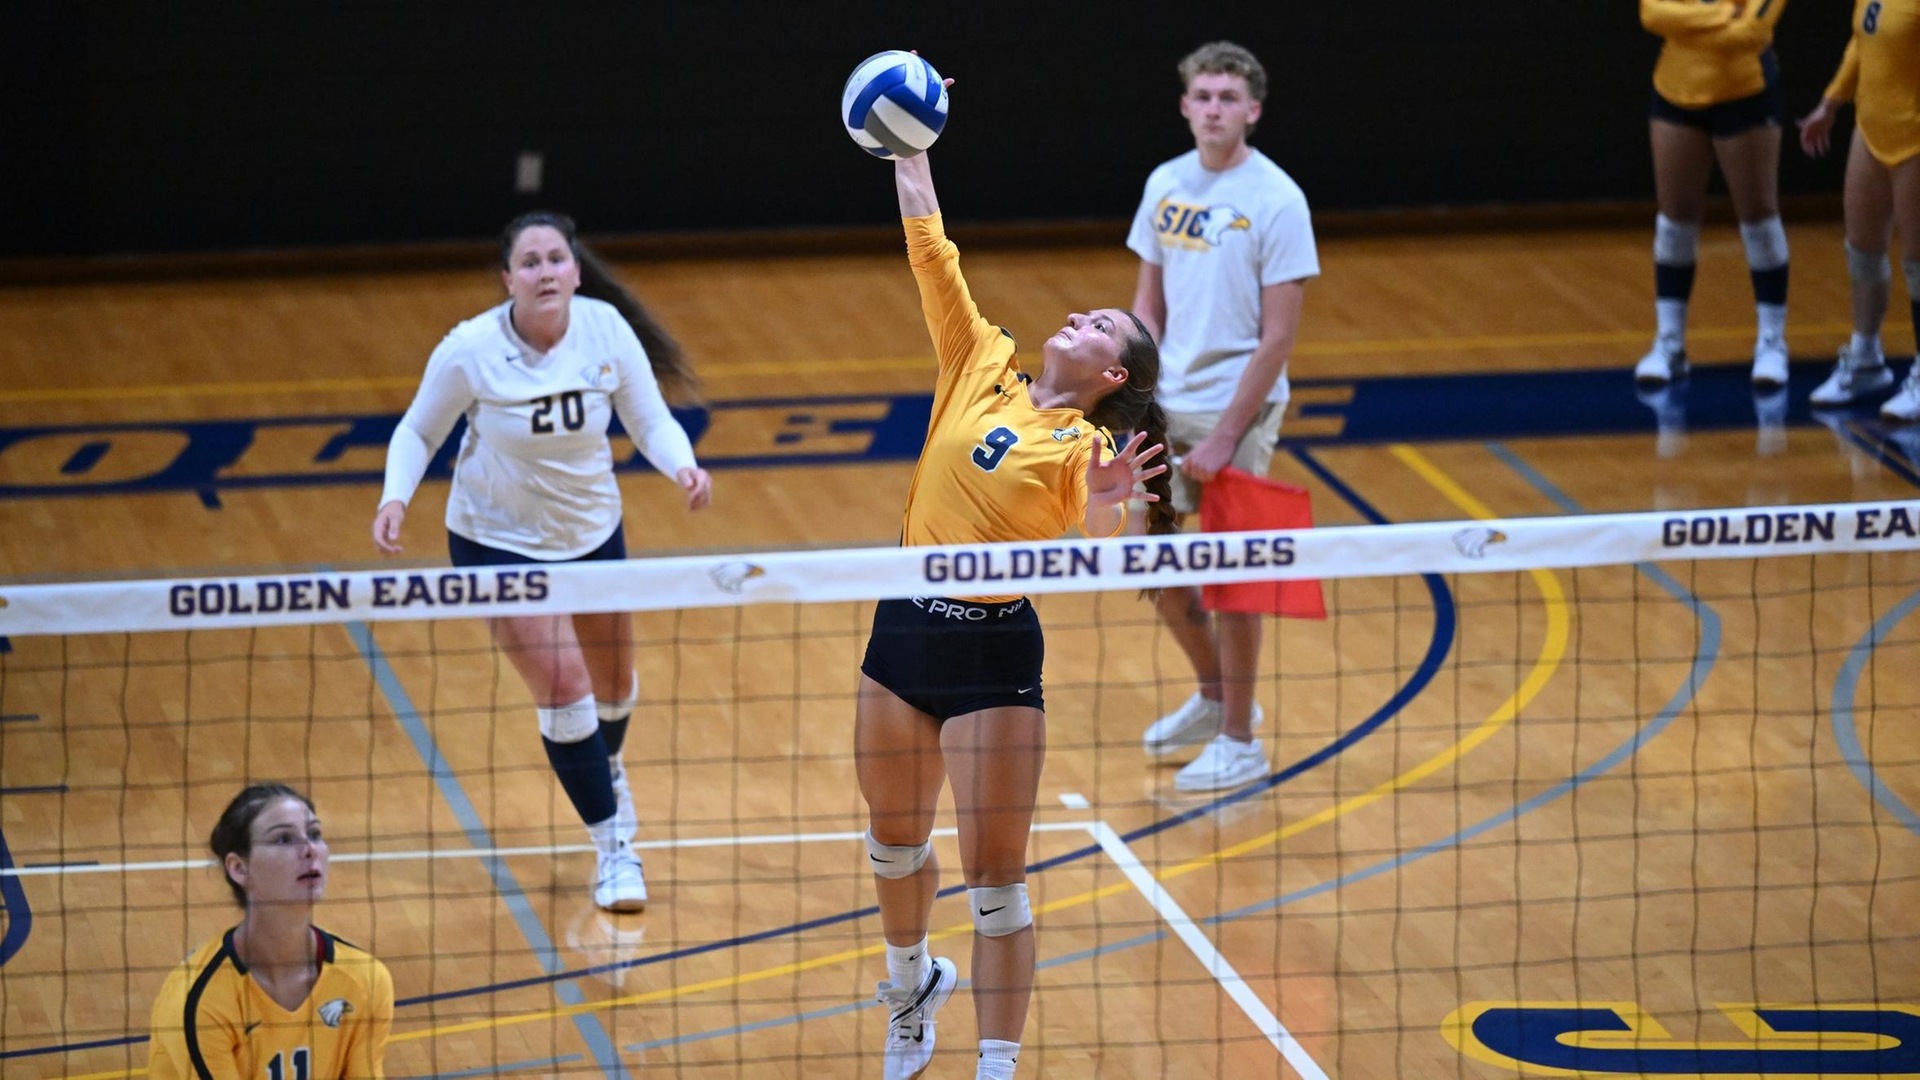 Women's Volleyball Takes Down SJBK, 3-1